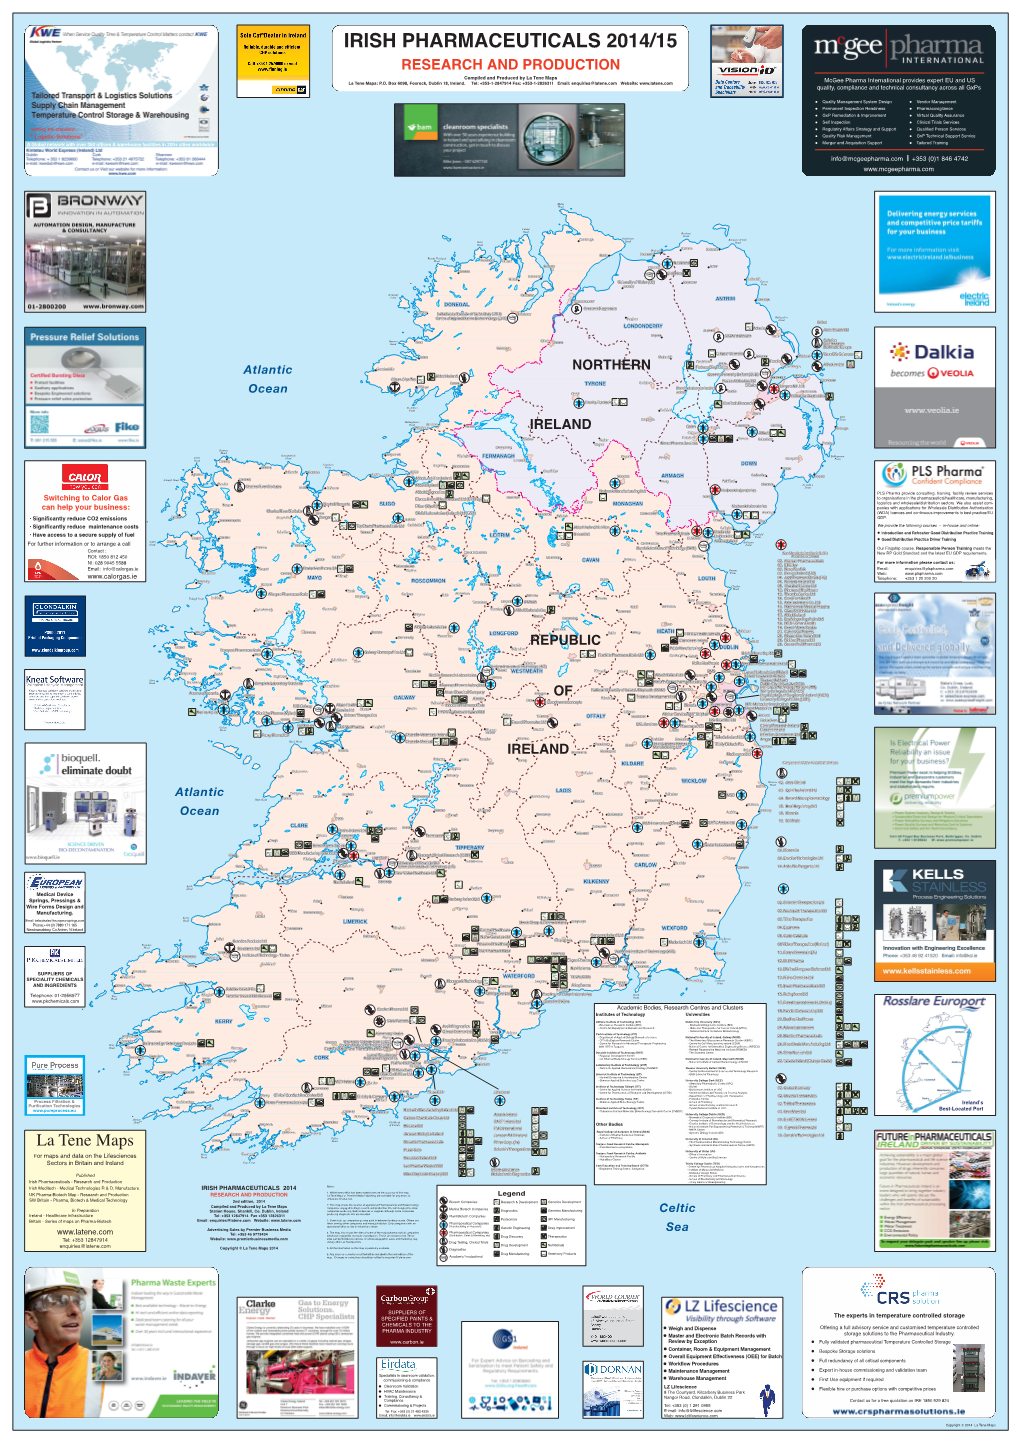 IRISH PHARMACEUTICALS 2014/15 RESEARCH and PRODUCTION Compiled and Produced by La Tene Maps La Tene Maps: P.O